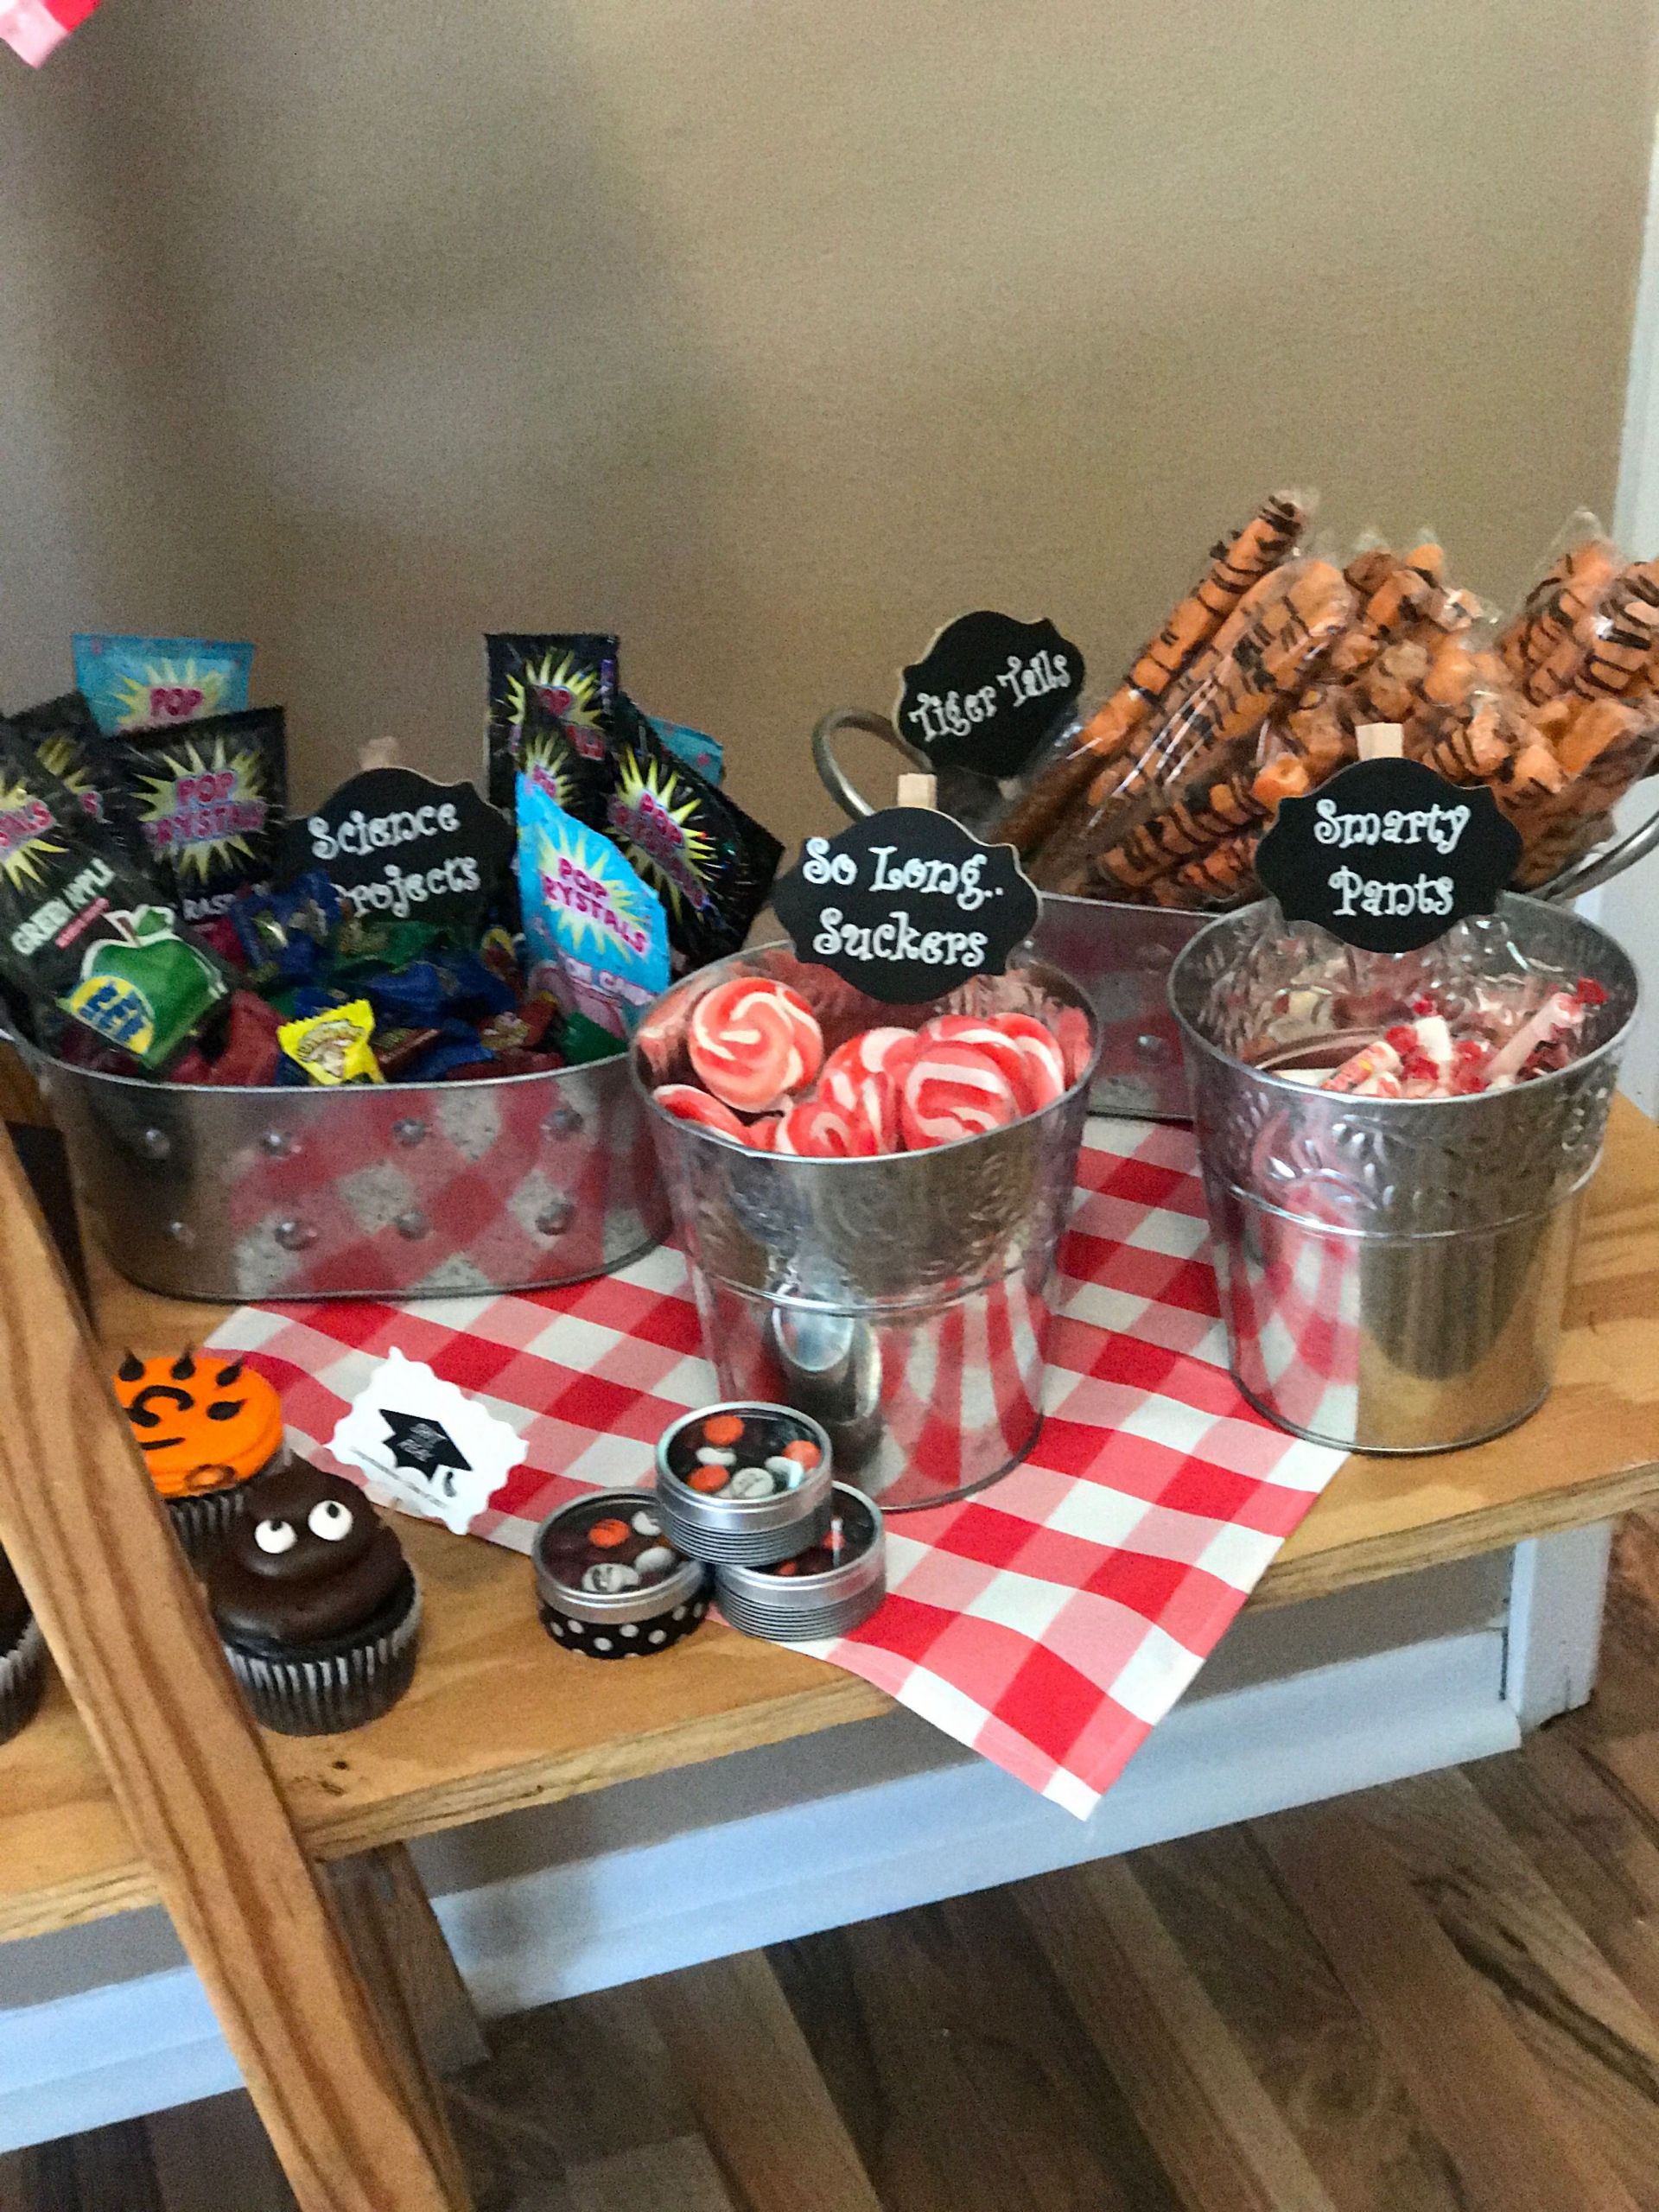 Graduation Party Candy Ideas
 Graduation party candy buffet suggestions I tried to